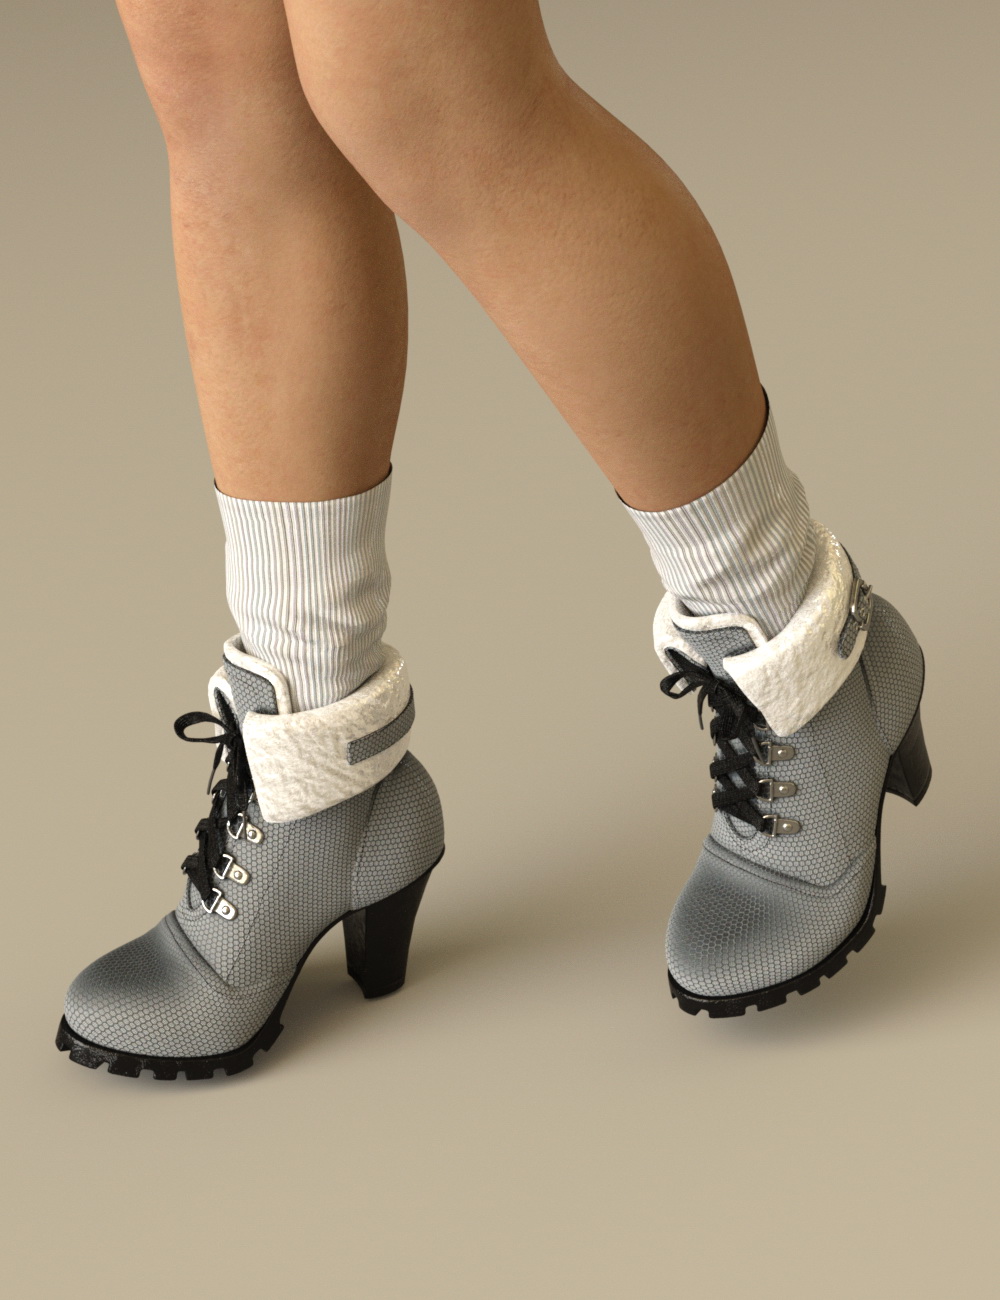 Off Road Boots for Genesis 8 Female(s) by: chungdan, 3D Models by Daz 3D